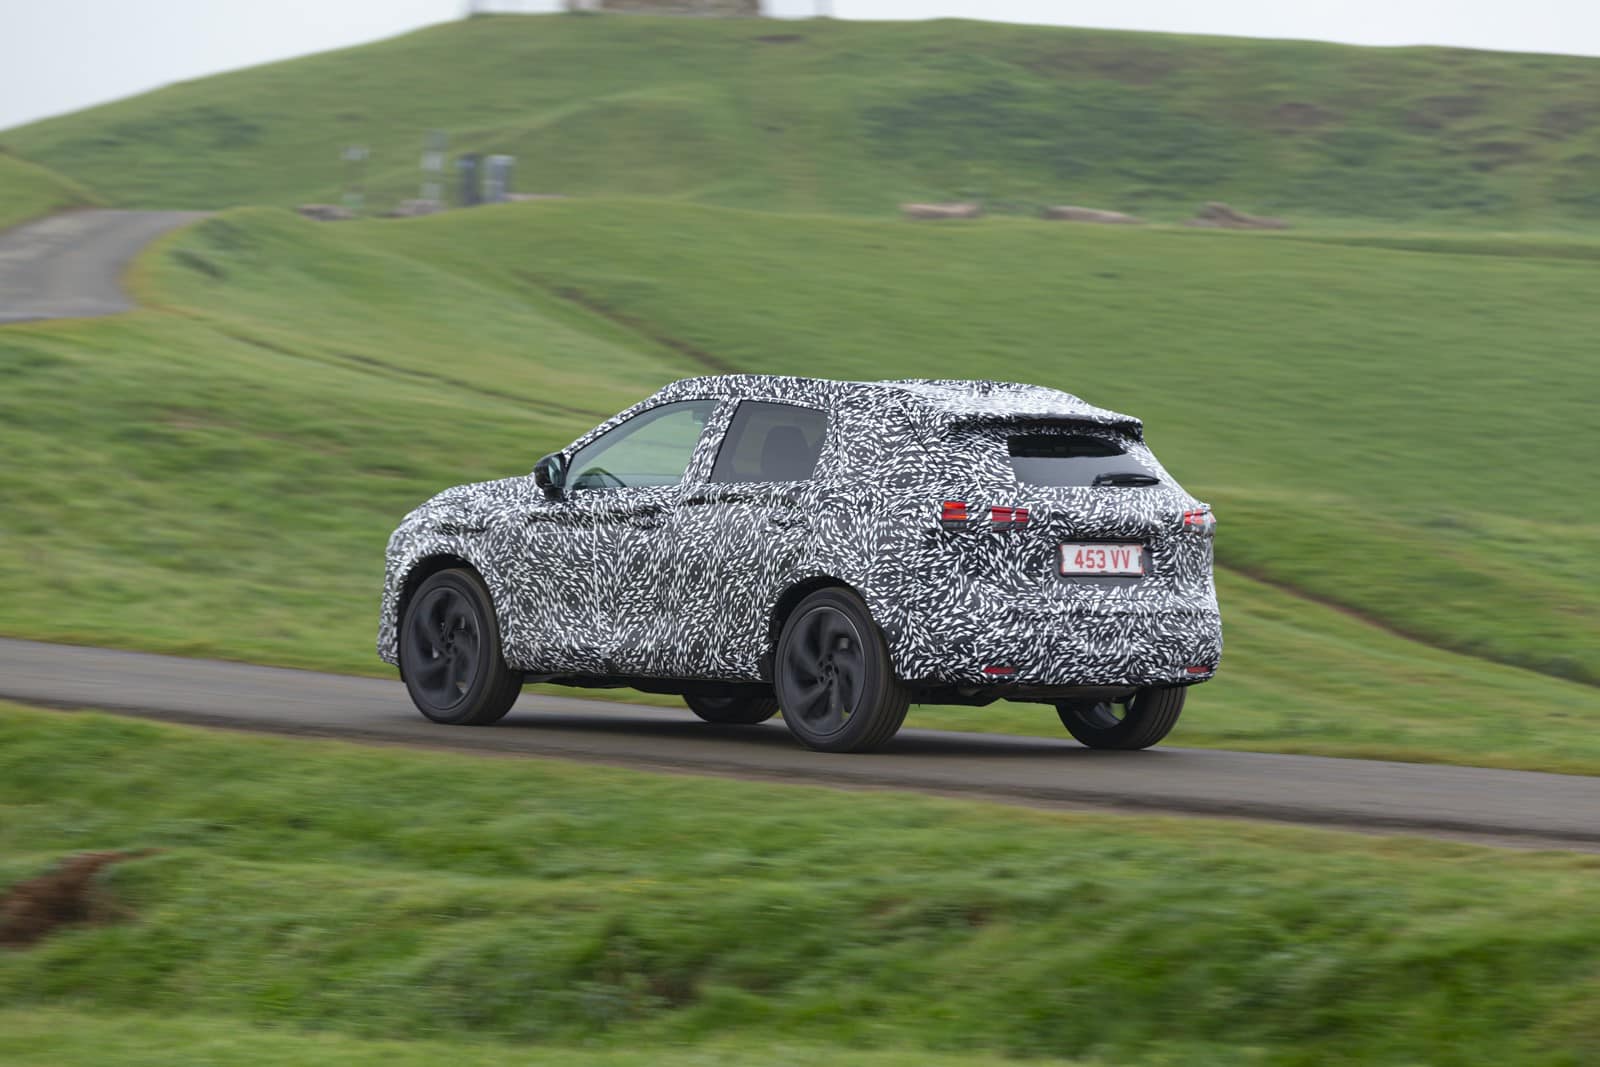 One last look at the 2021 Nissan Qashqai ahead of its debut this week